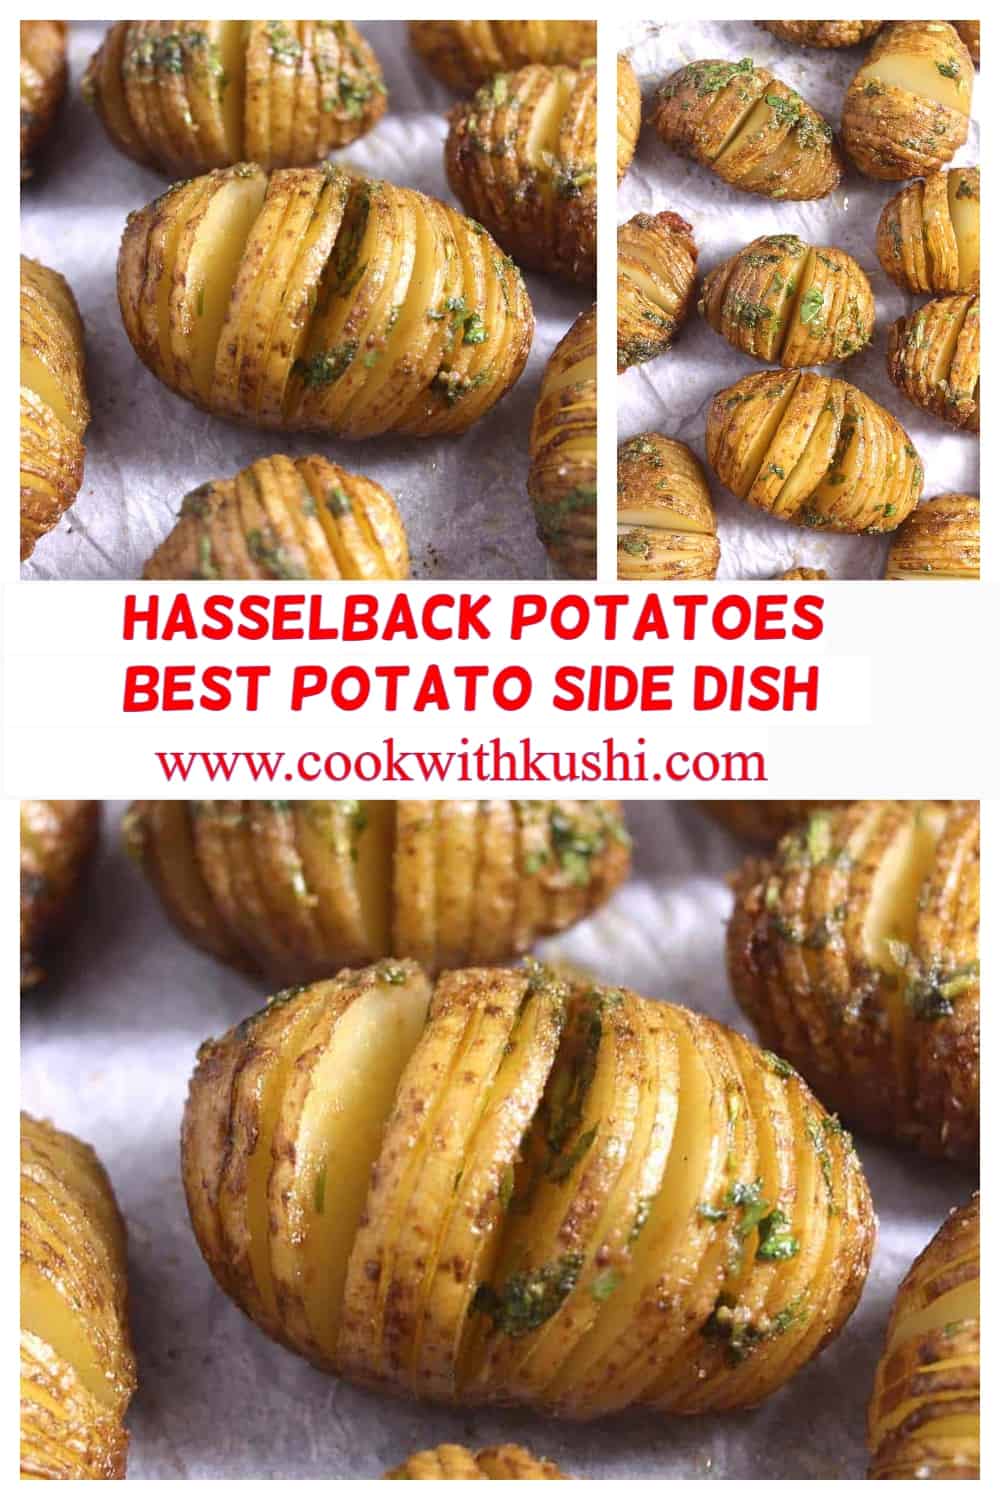 A collage of pics showing Hasselback Potatoes.